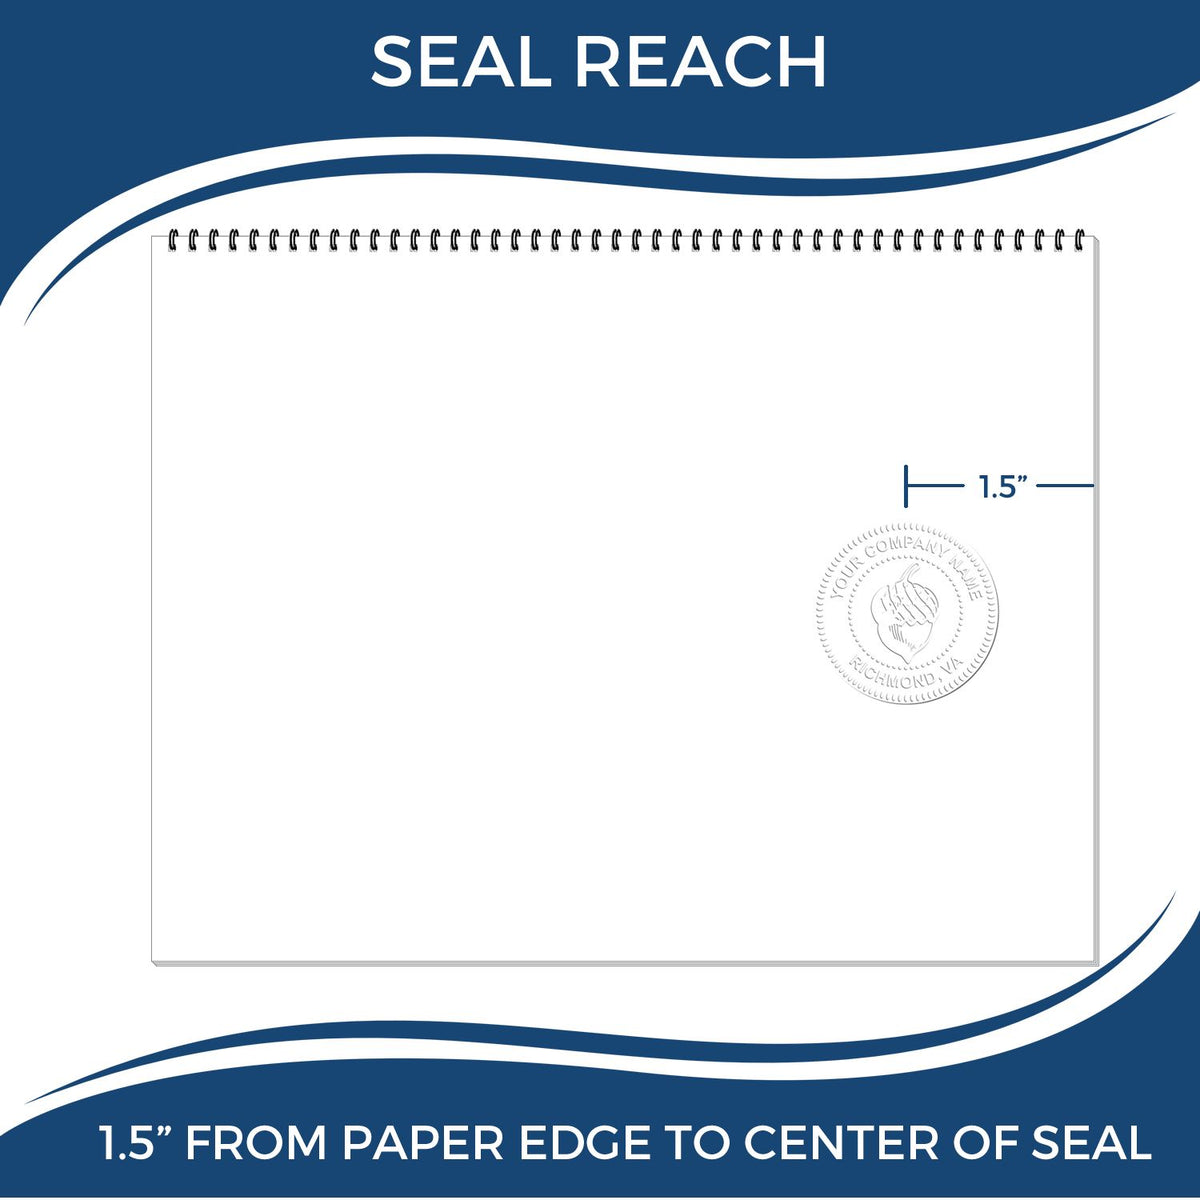 An infographic showing the seal reach which is represented by a ruler and a miniature seal image of the Soft Montana Professional Geologist Seal